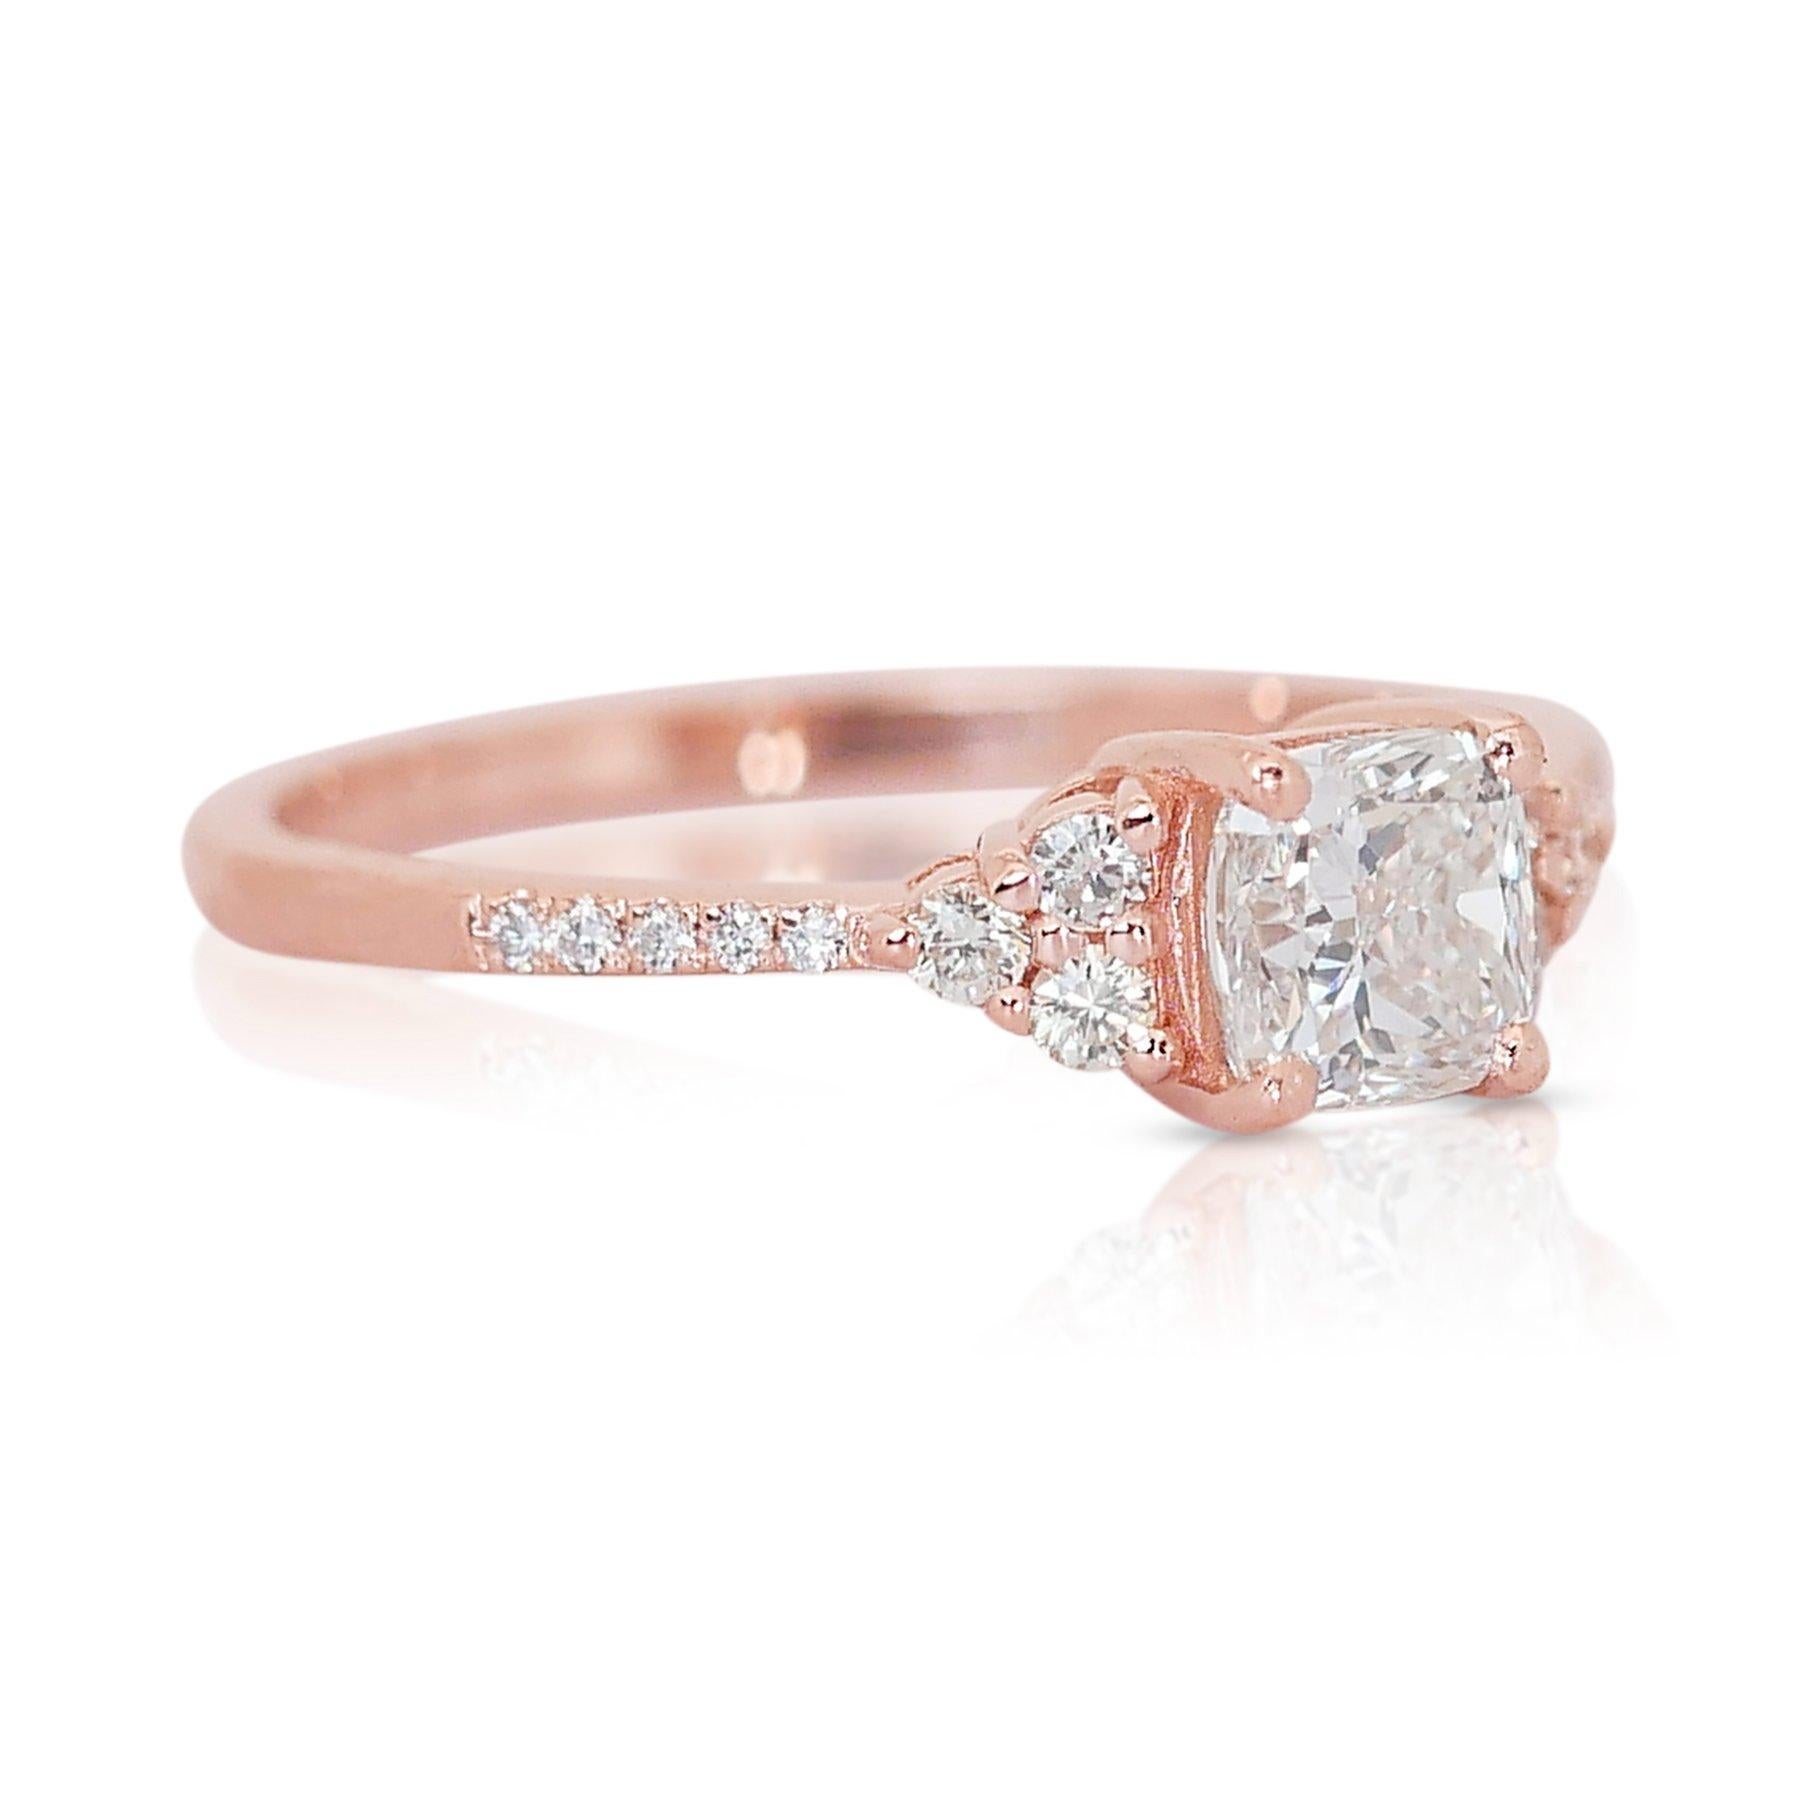 Cushion Cut Sophisticated 1.65ct Diamonds Pave Ring in 14k Rose Gold - GIA Certified For Sale